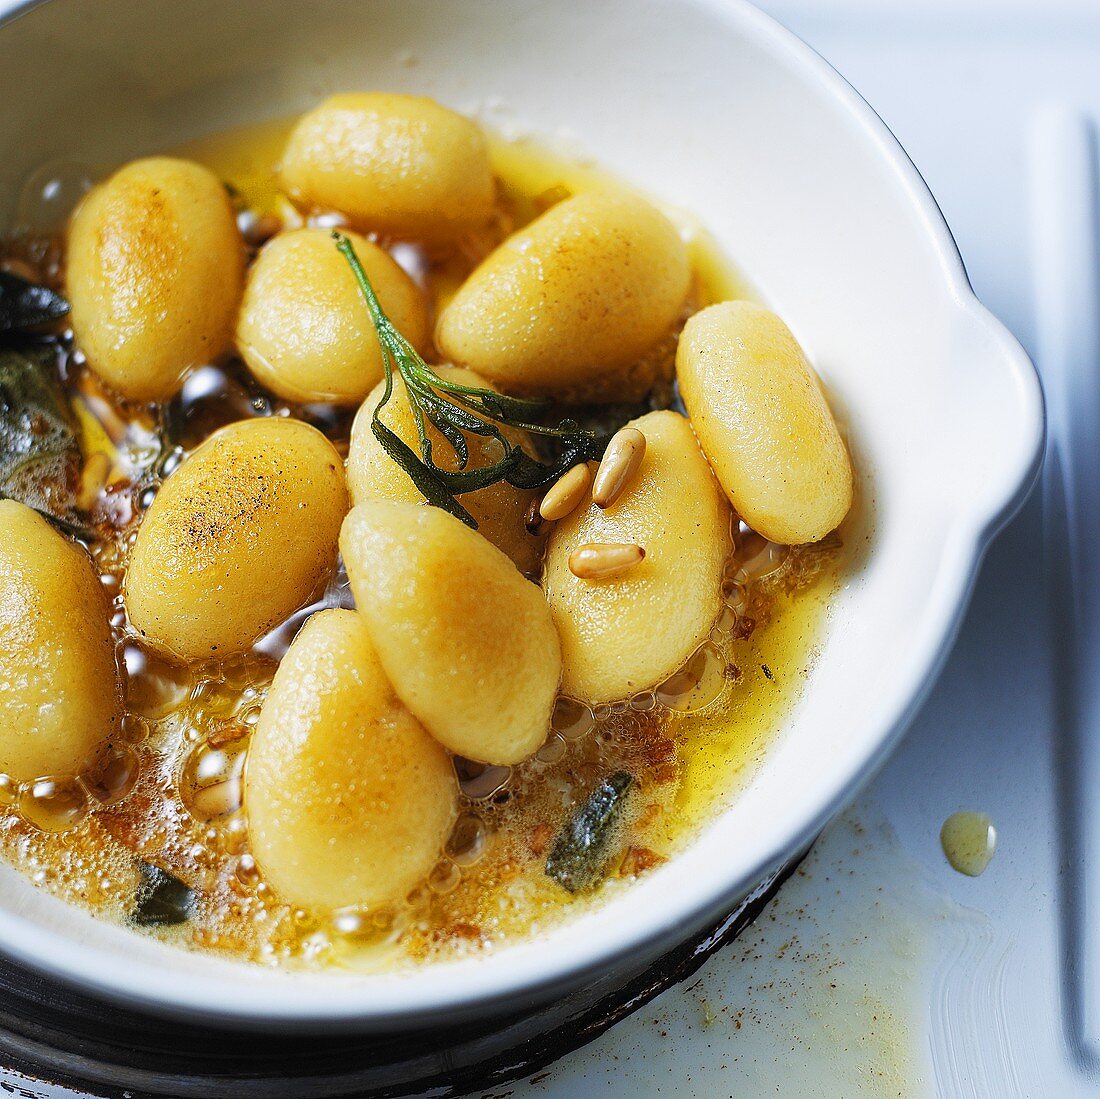 Gnocchi in sage butter with pine nuts